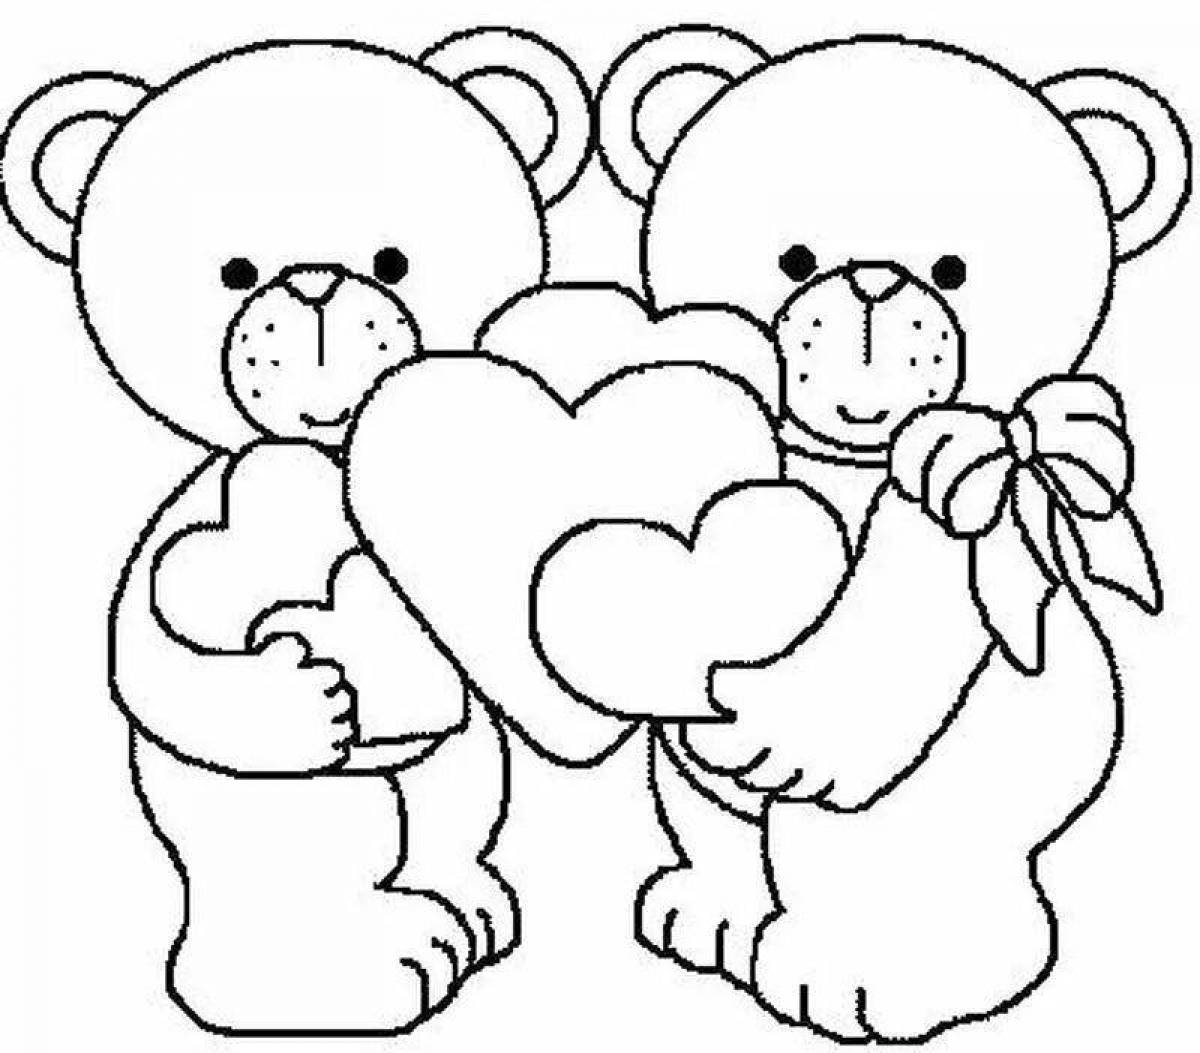 Fluffy teddy bear with heart coloring book